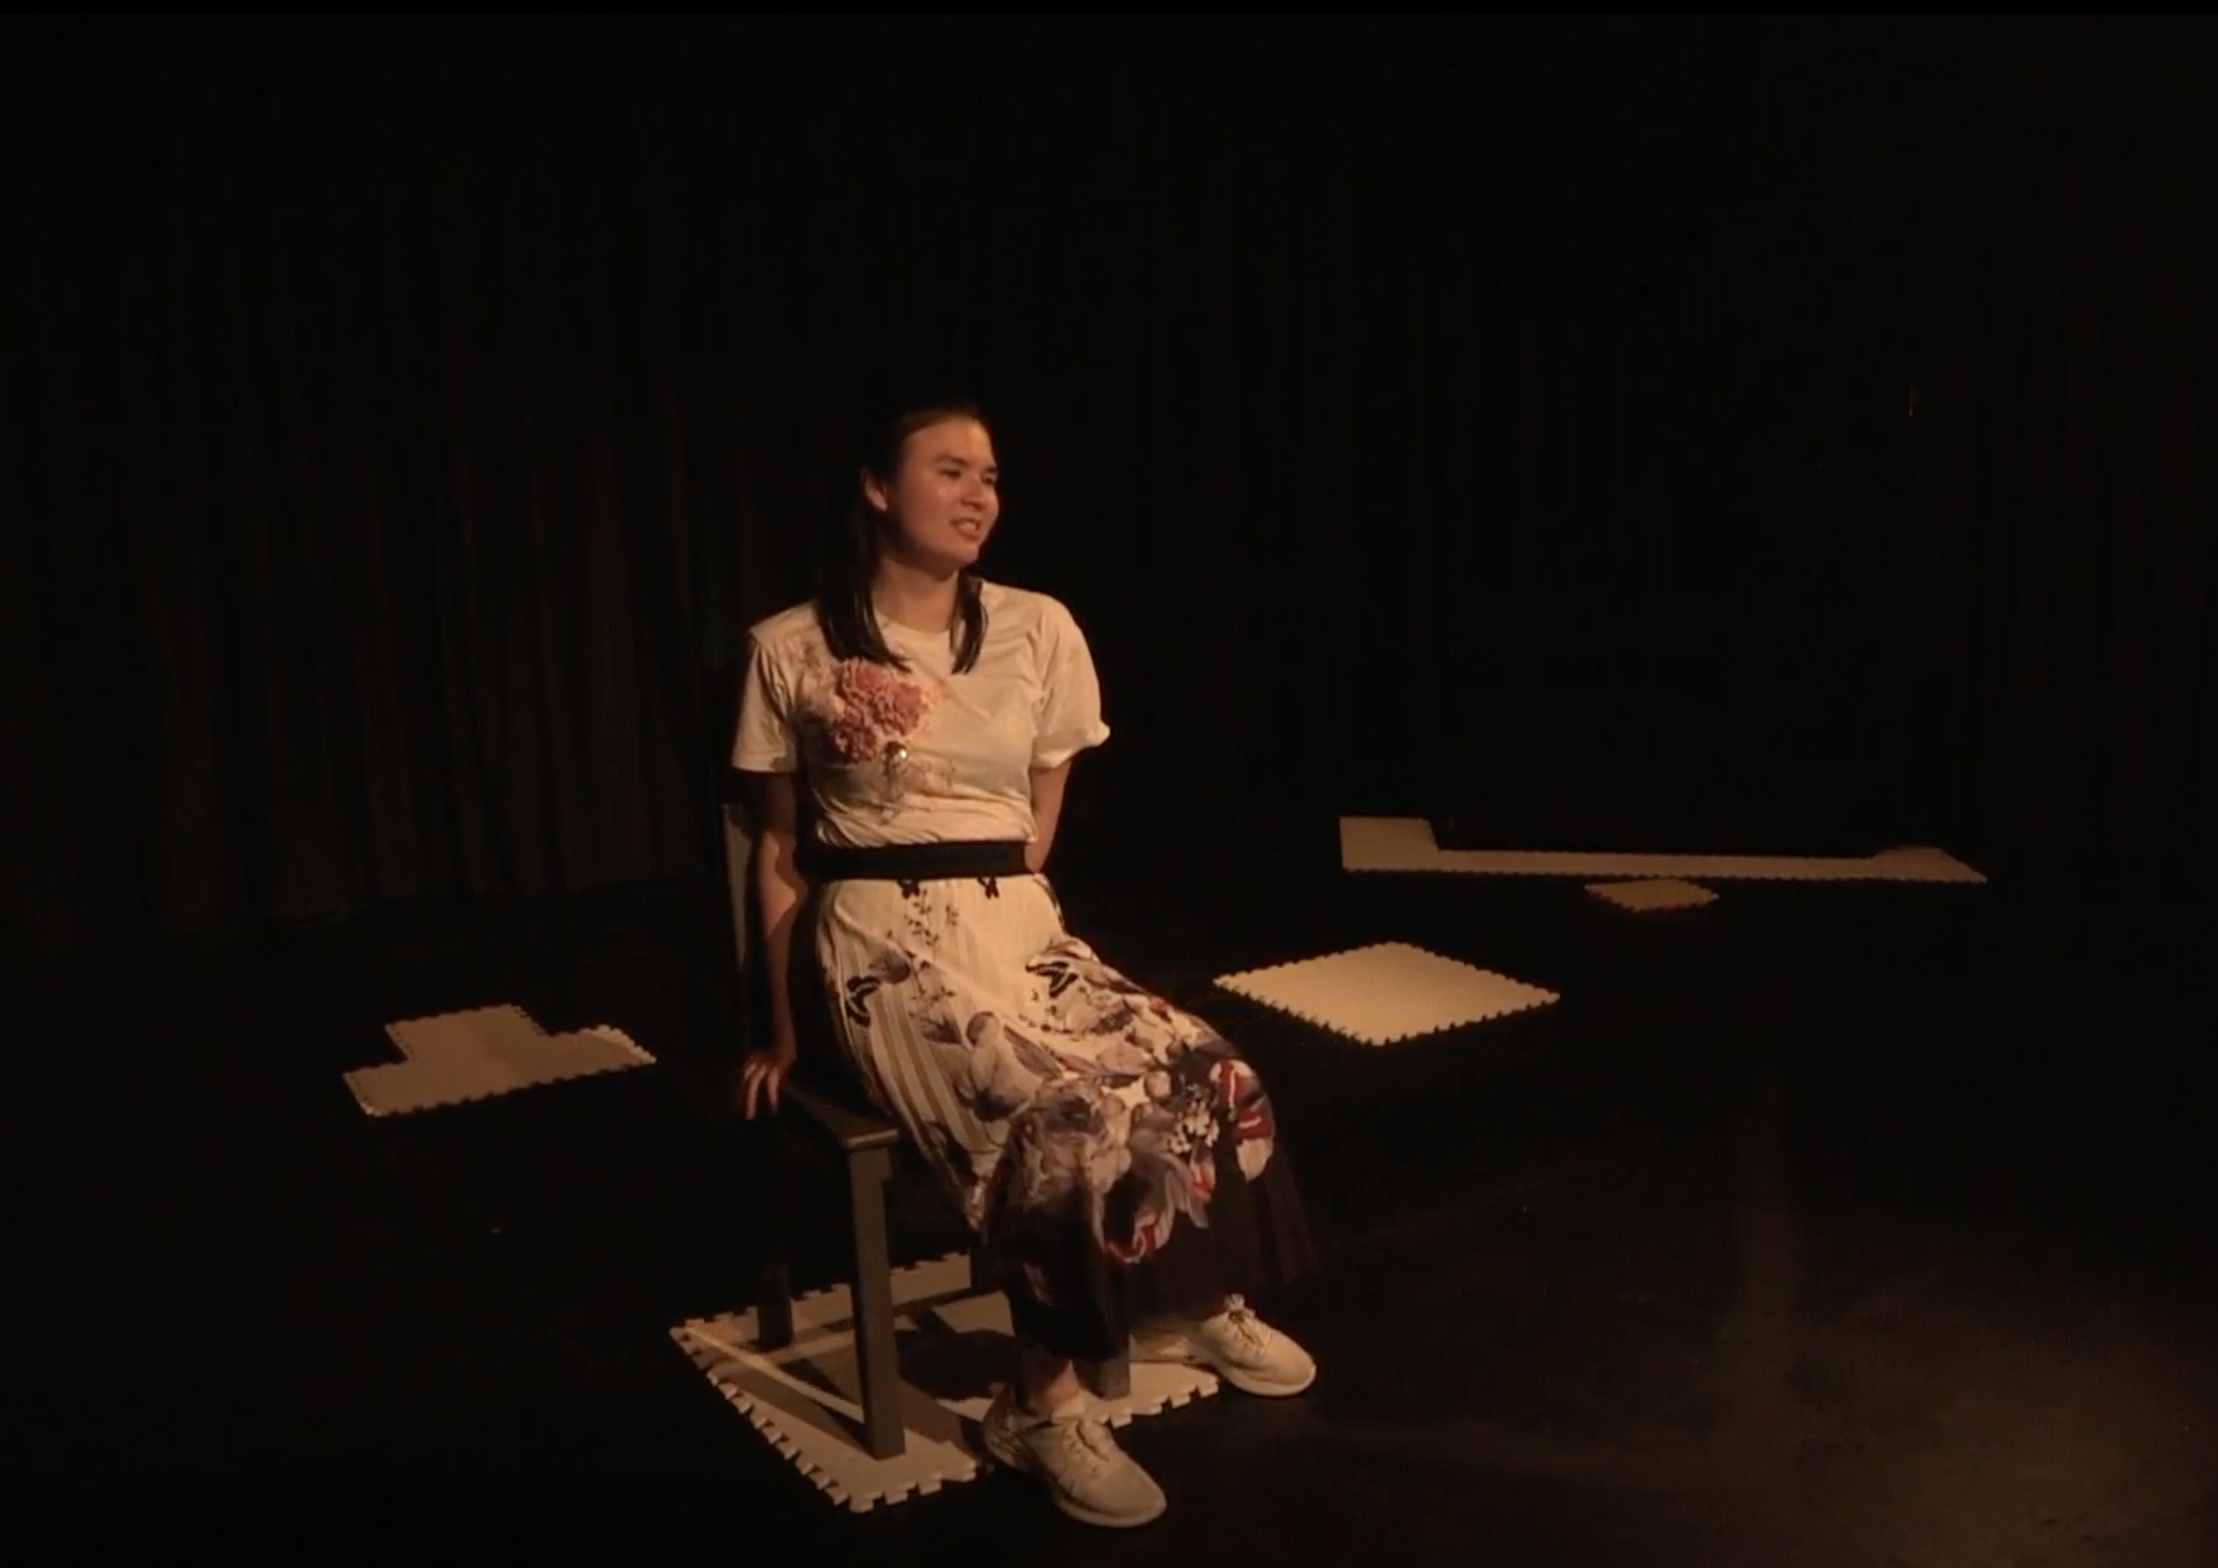 Jasmin Thien sits on a wooden chair in a black box theatre. Jasmin is a young Chinese-British woman with long dark hair pinned back off her face. She wears a white top and skirt decorated with floral motifs, and white trainers. The floor under the chair and around the stage is marked with white tactile flooring tiles.